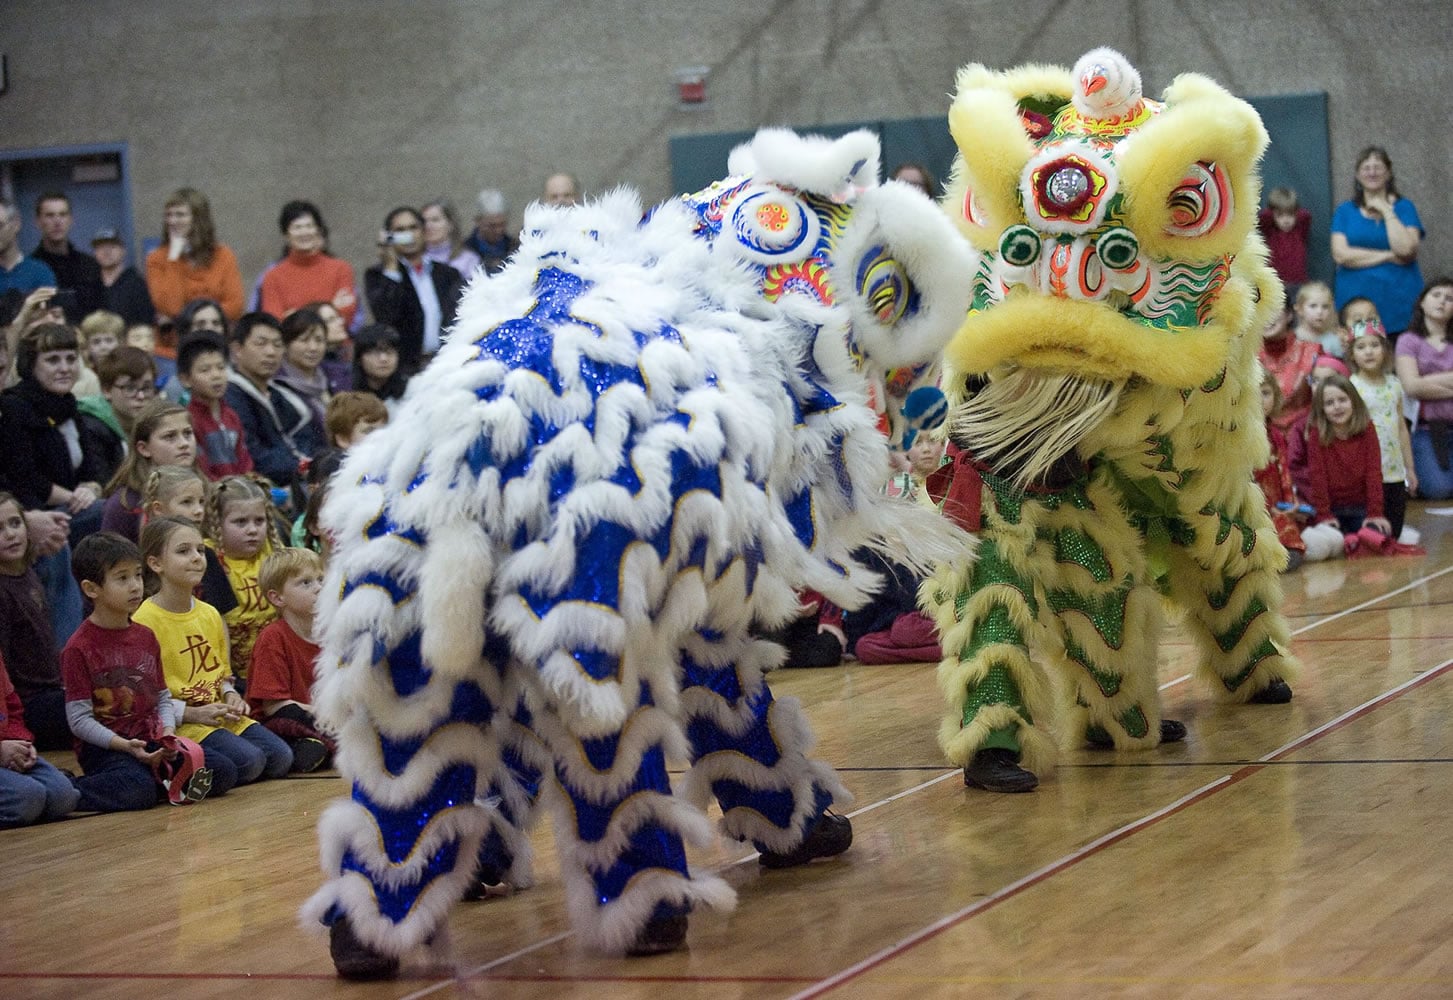 Portland Lee's Association Lion Dance Team performs during a program to celebrate the Chinese New Year at Ben Franklin Elementary School on Friday.